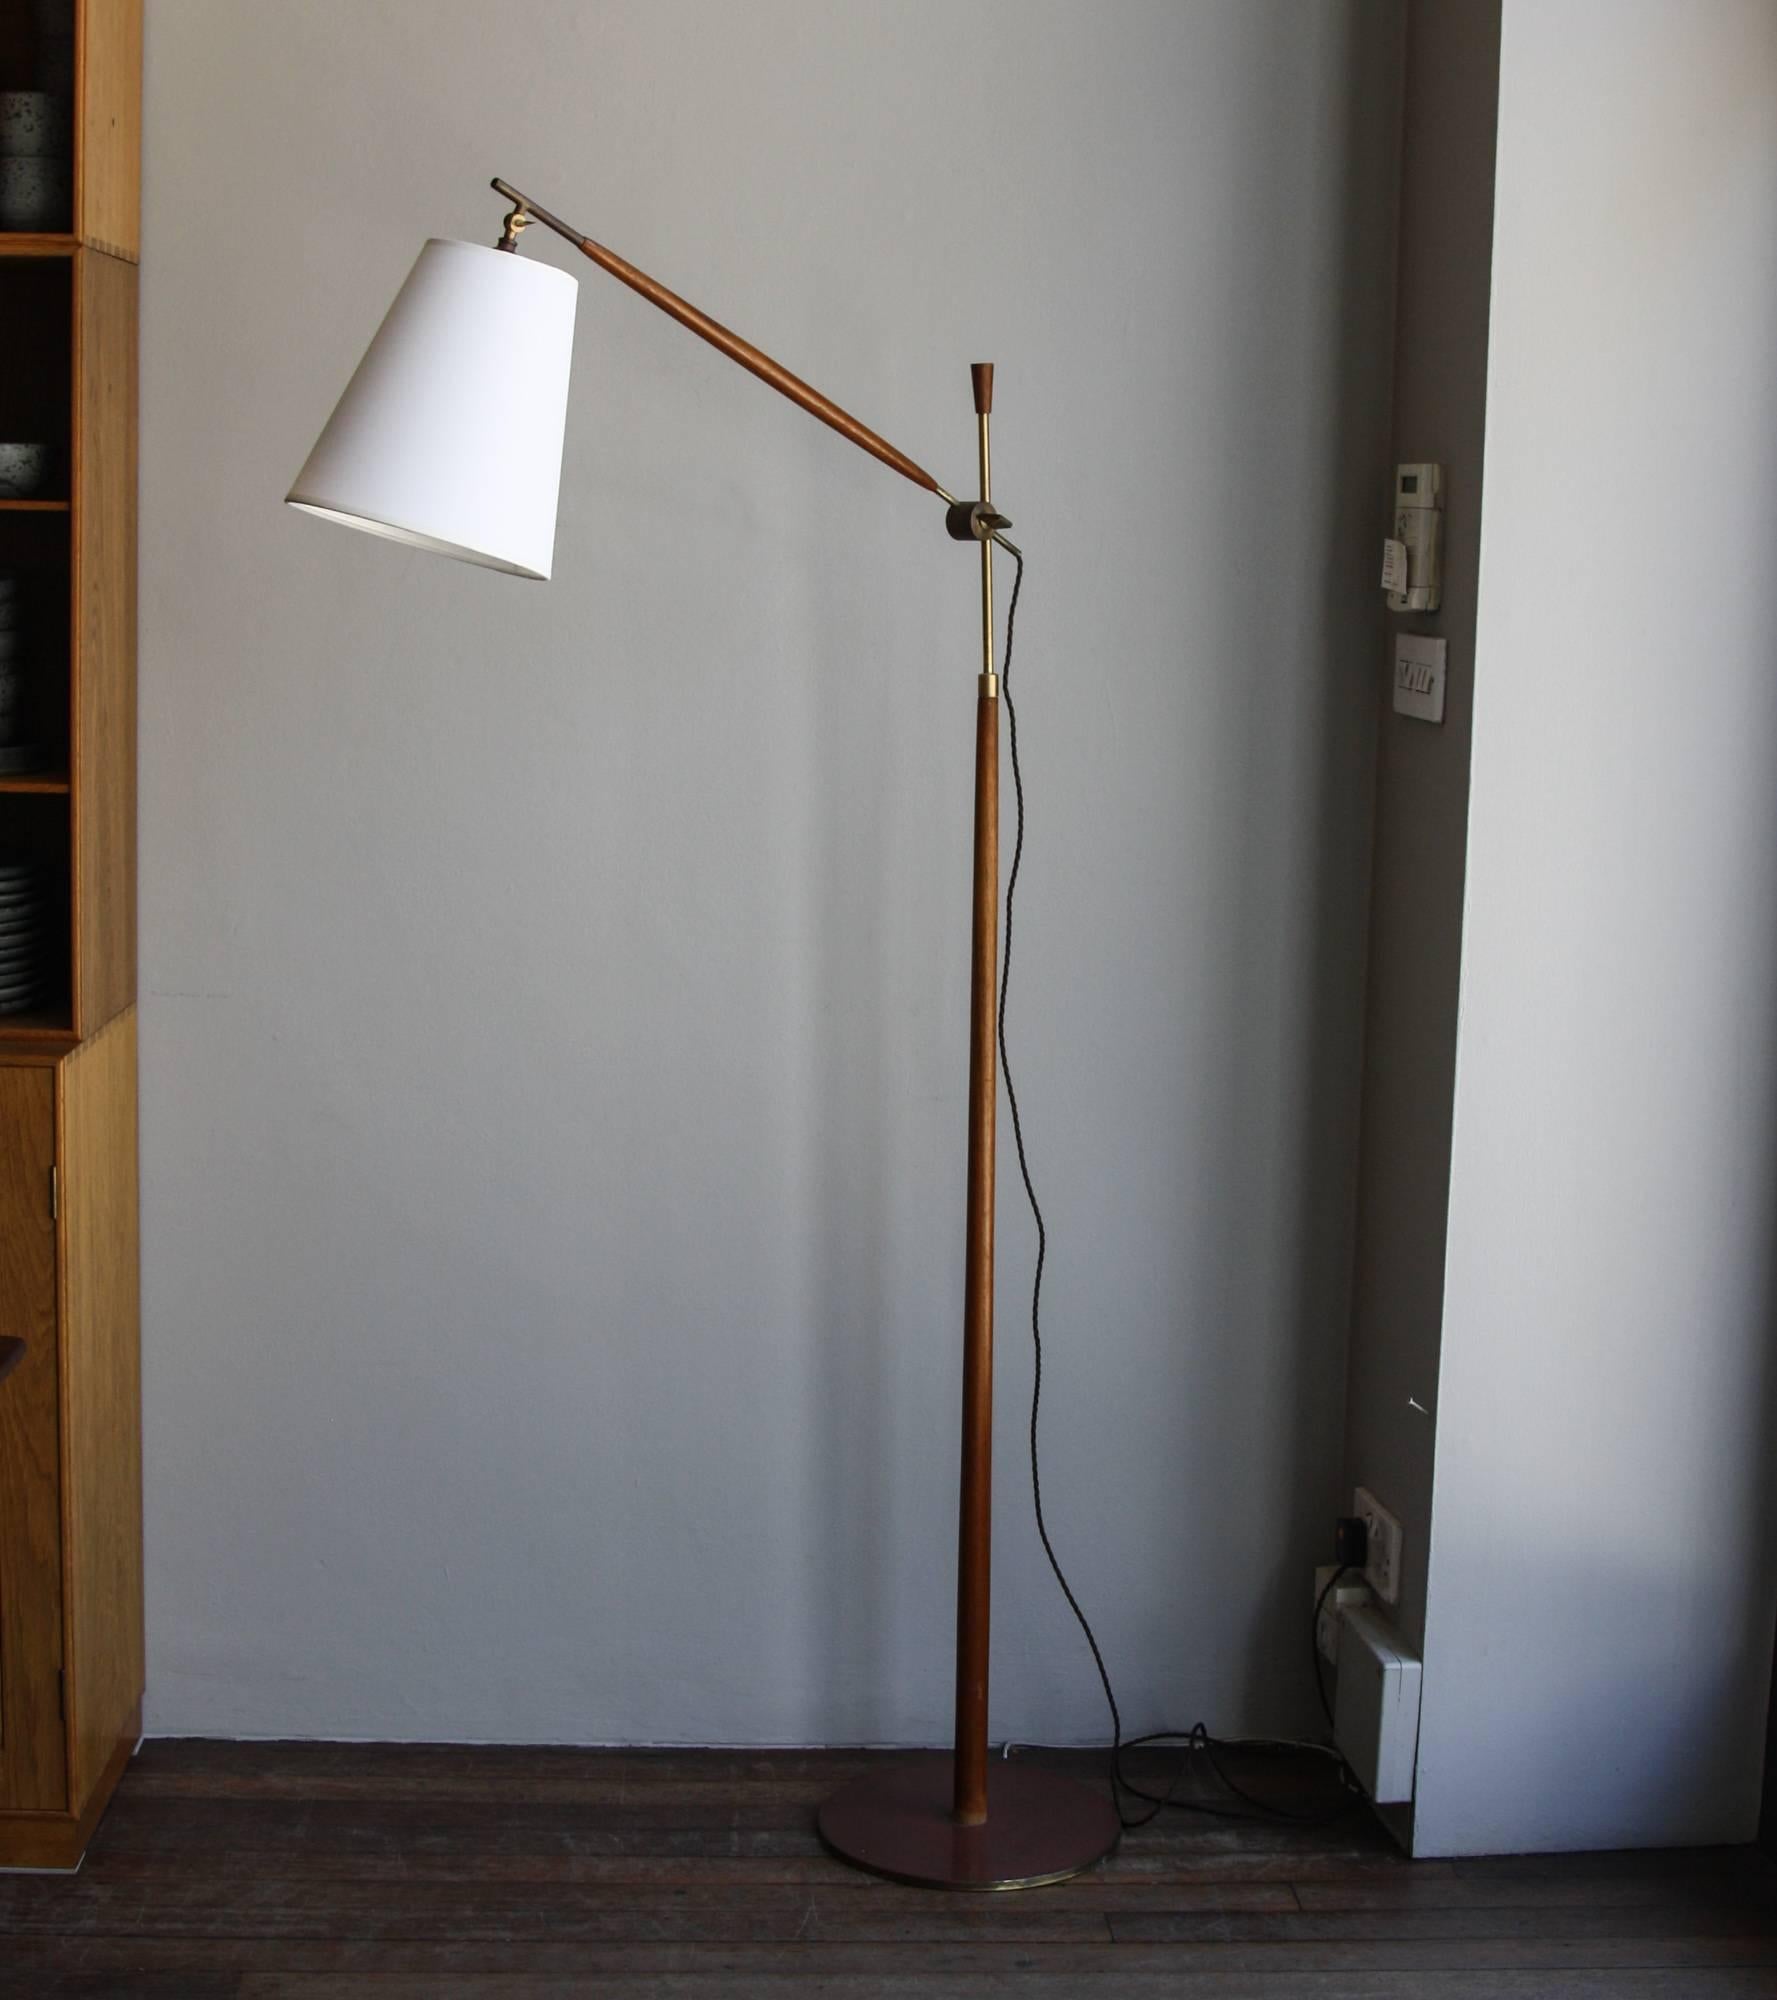 Vintage Danish floor lamp made by Le Klint in 1950s.
The head can be moved around a 360 degree solid angle while the arm can be adjusted to change is angle to the stem. Stem and arm are in polished brass covered in teak.
In excellent condition.